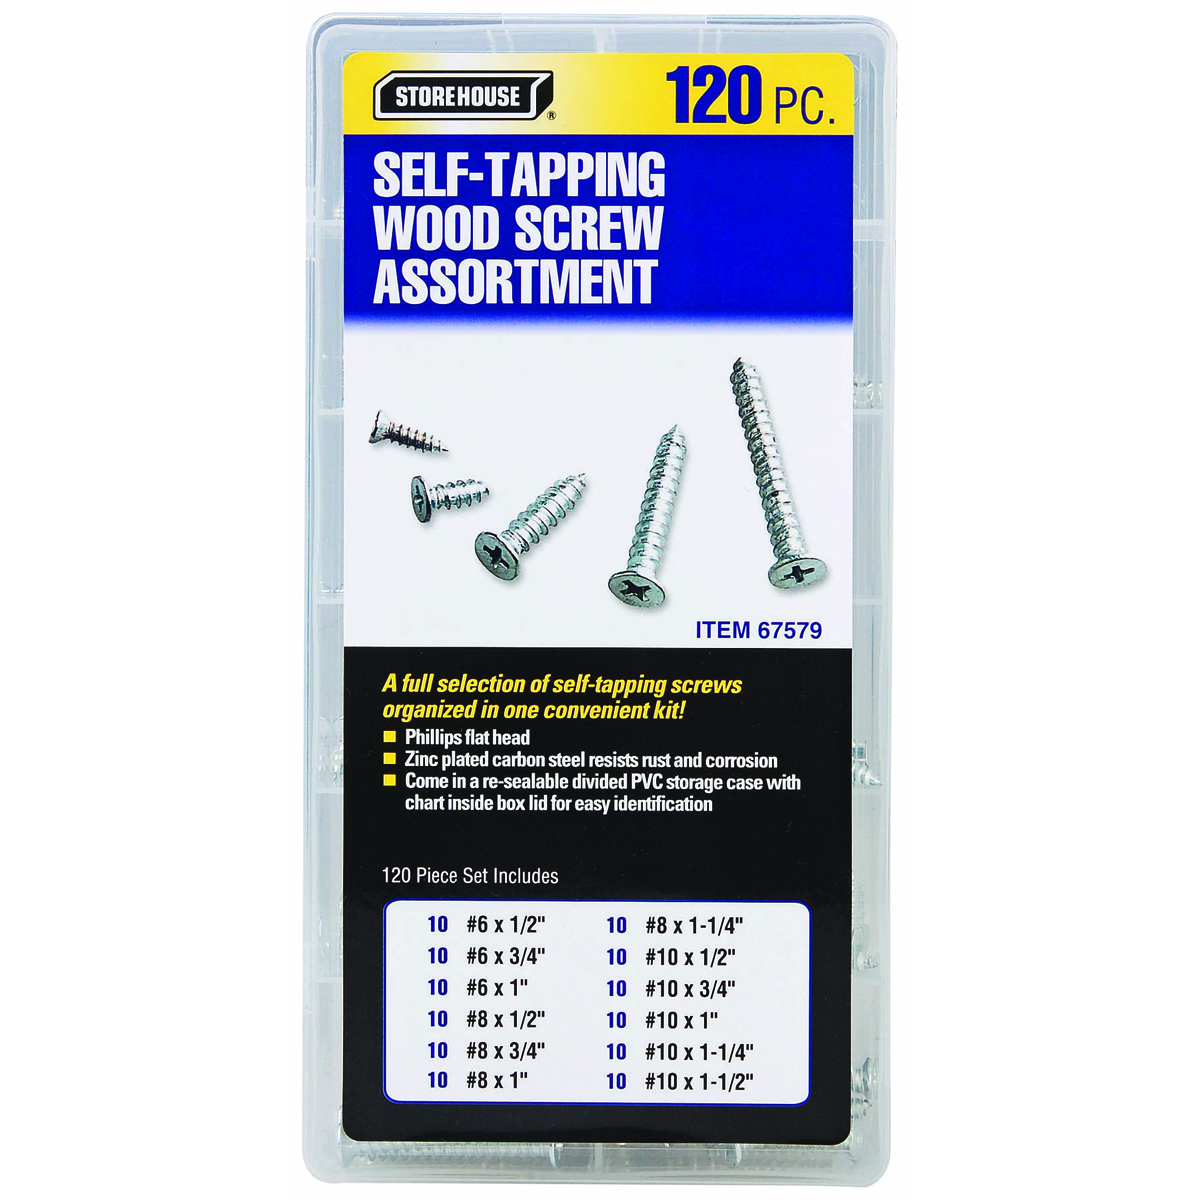 STOREHOUSE 120 Piece Self-Tapping Wood Screw Set - Item 67579